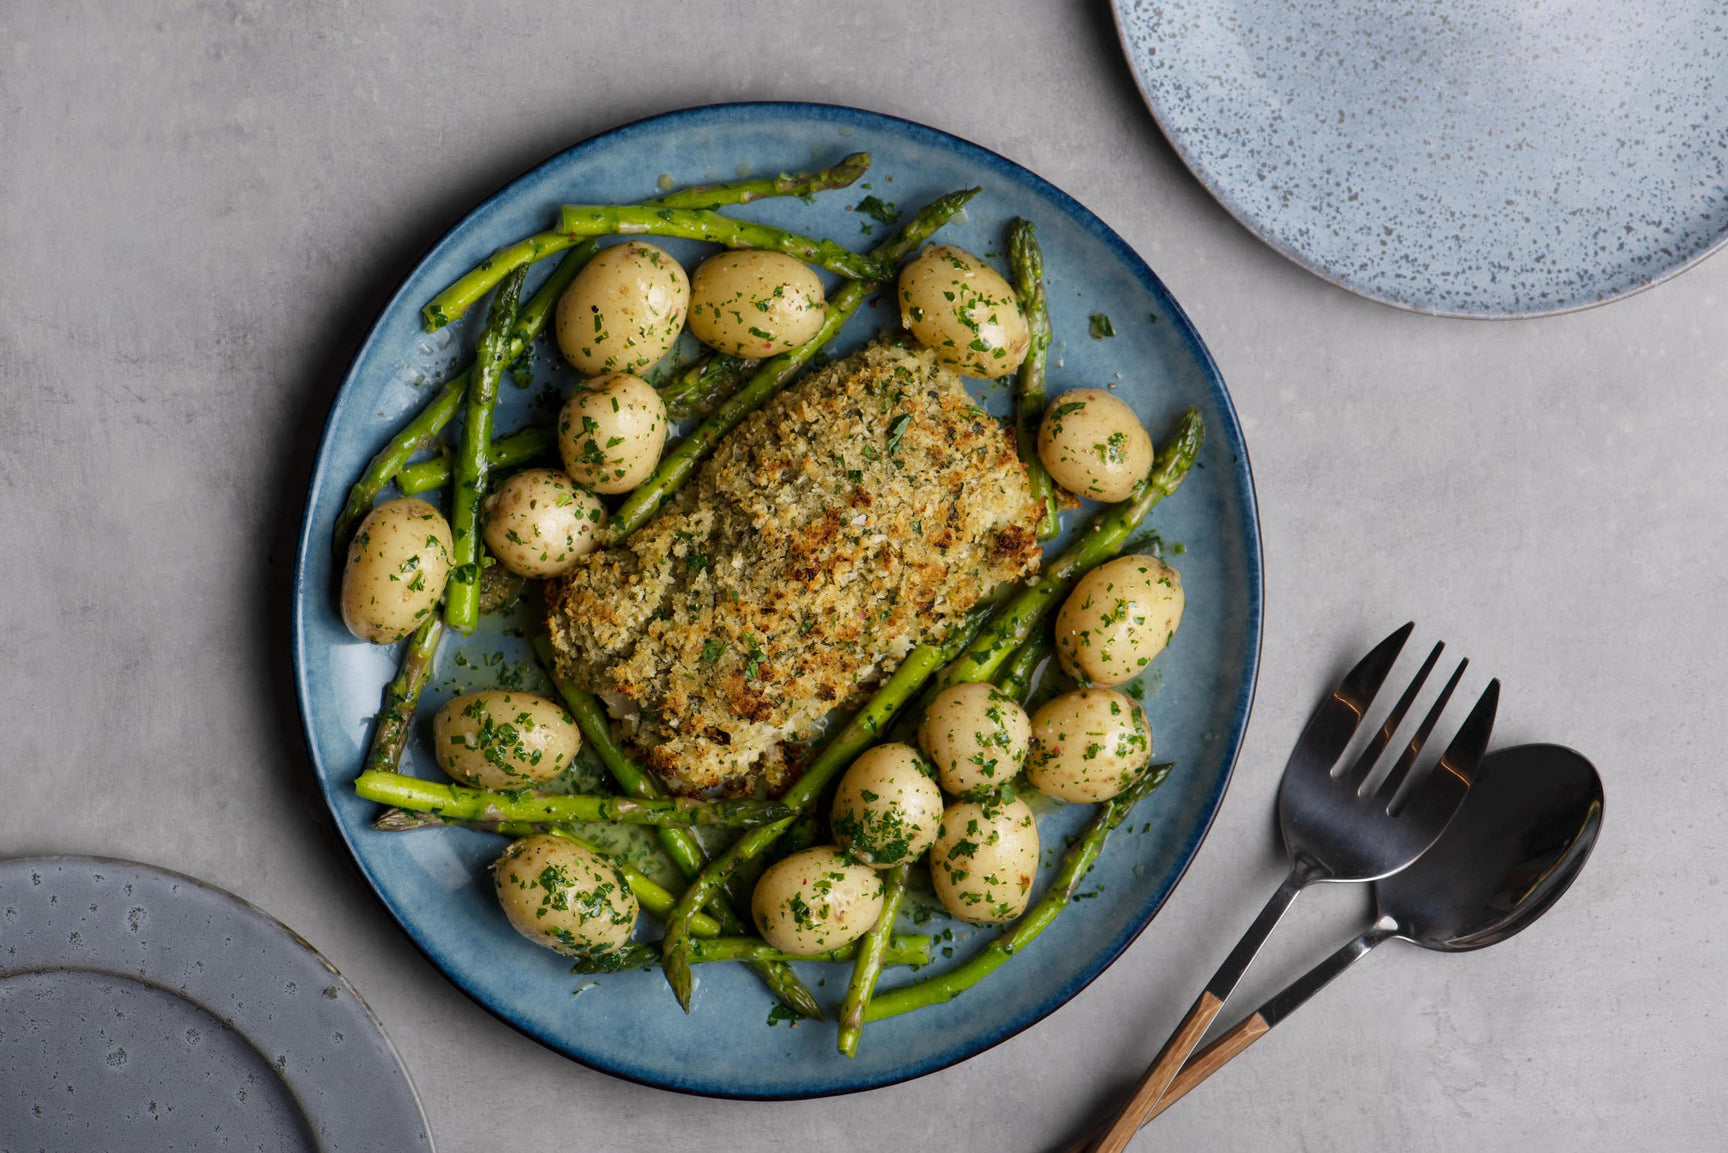 Cod loin baked with a lemon and herb crust, buttery new potatoes and asparagus